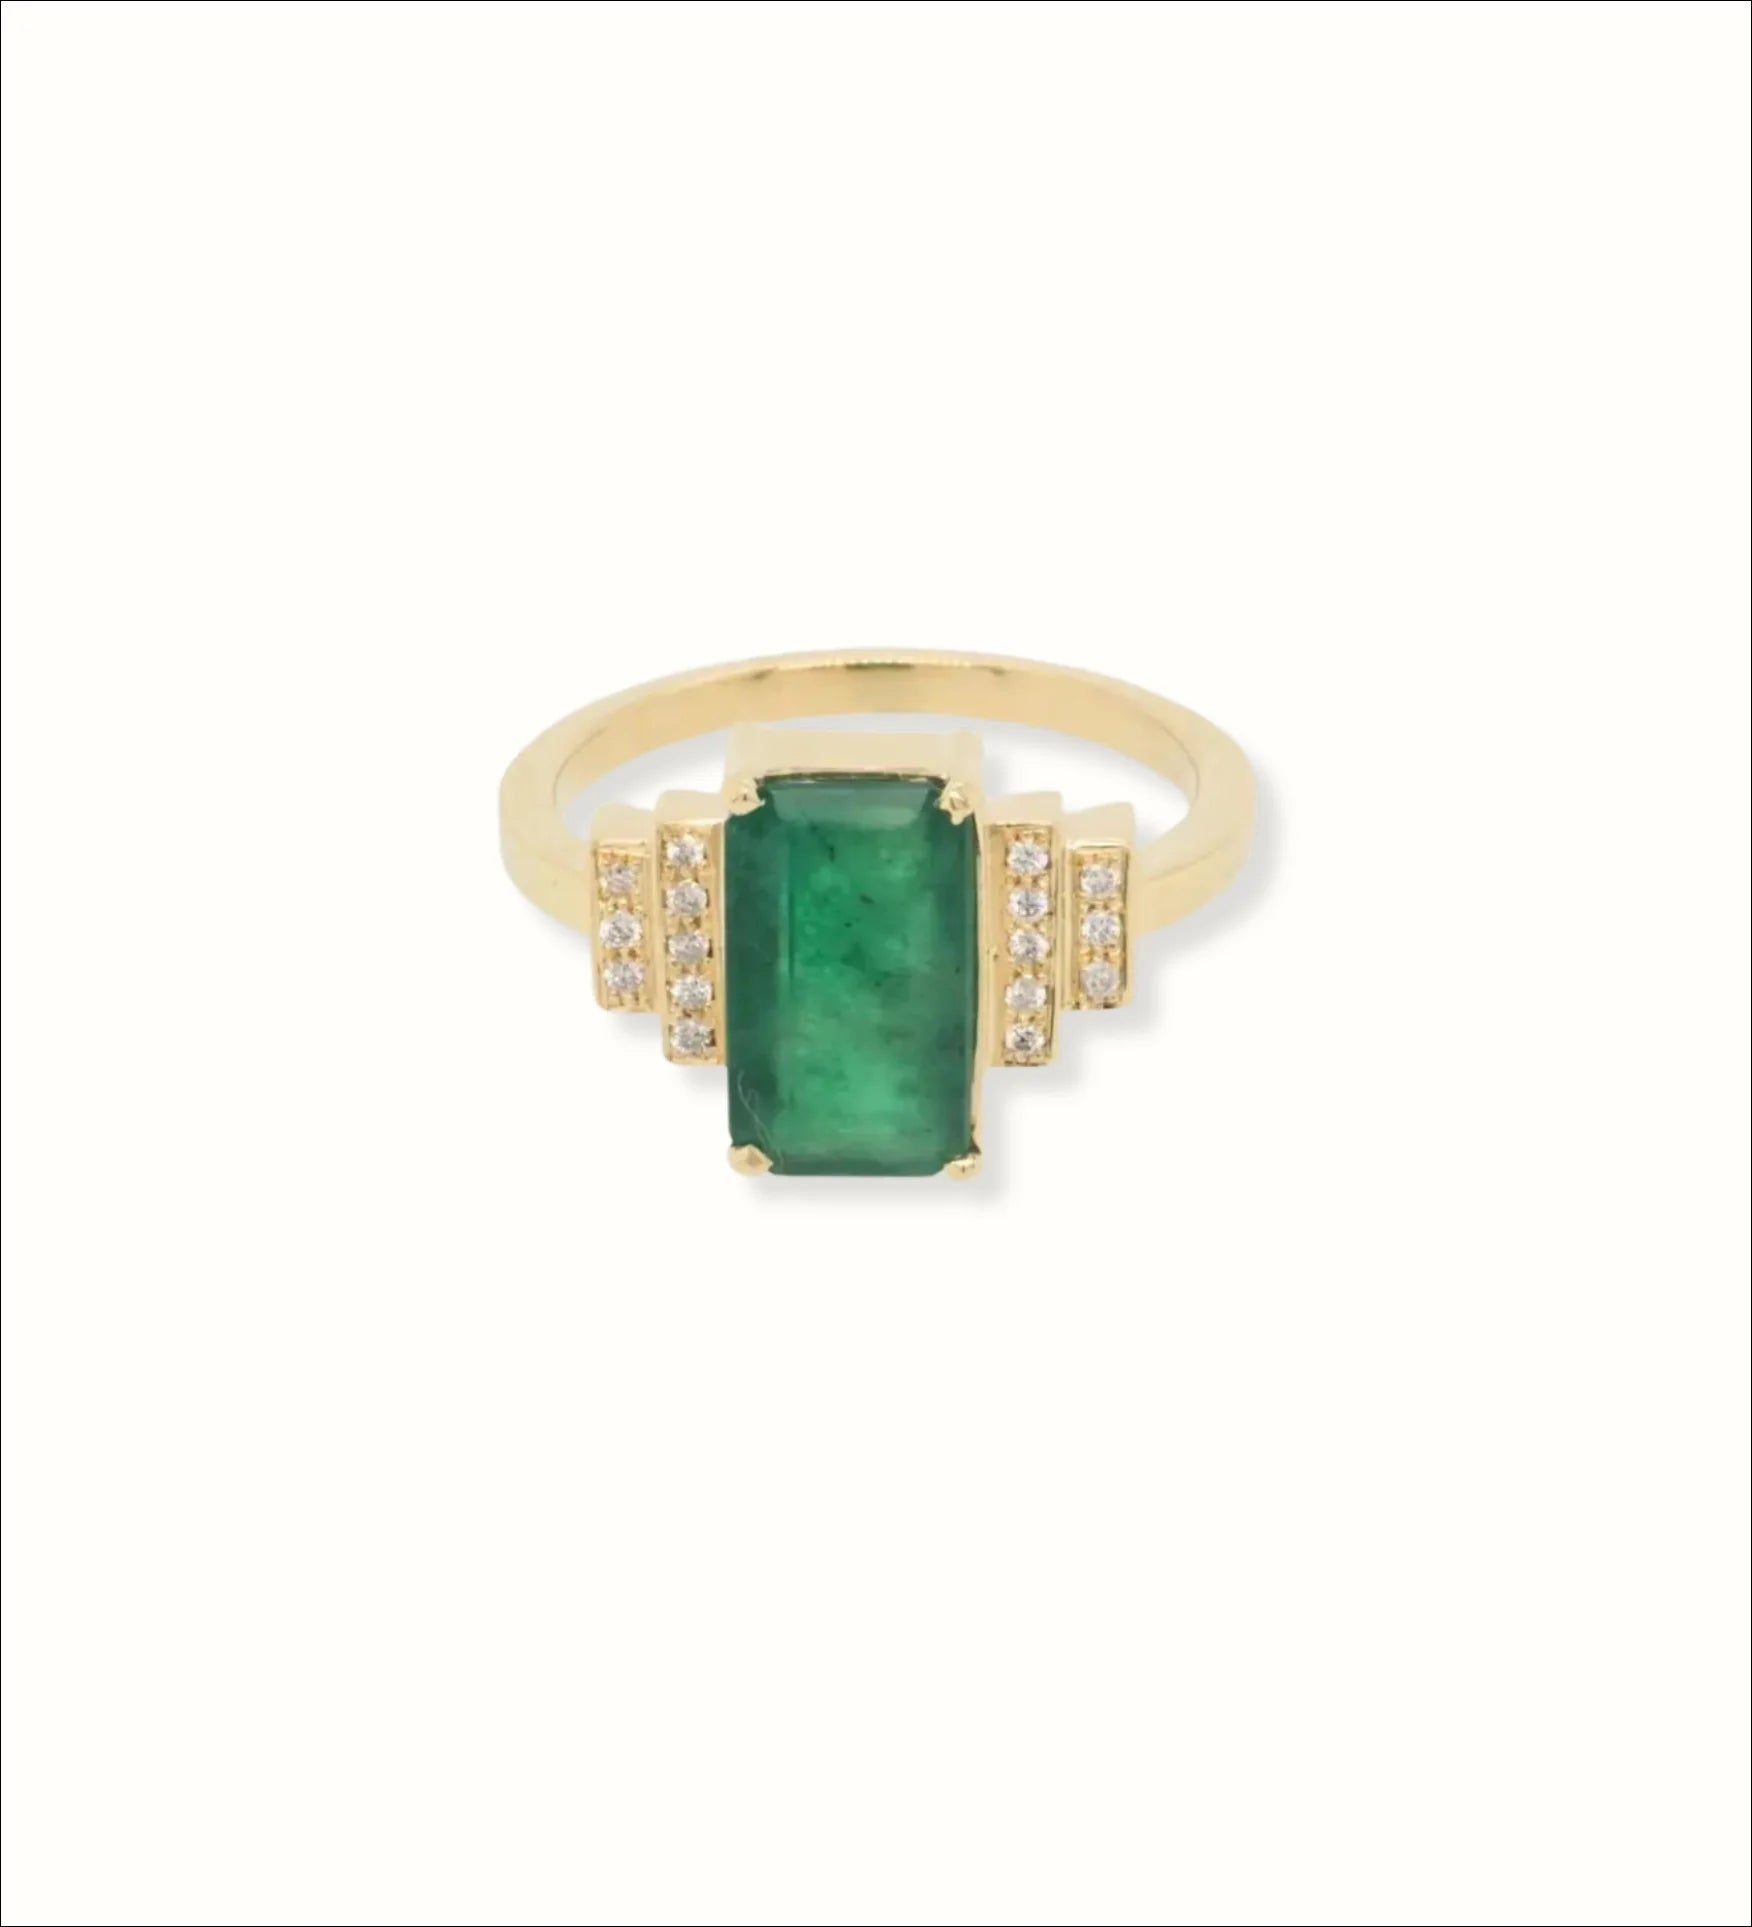 Exquisite 18k Gold Ring with 2.3ct Emerald | Above $1000